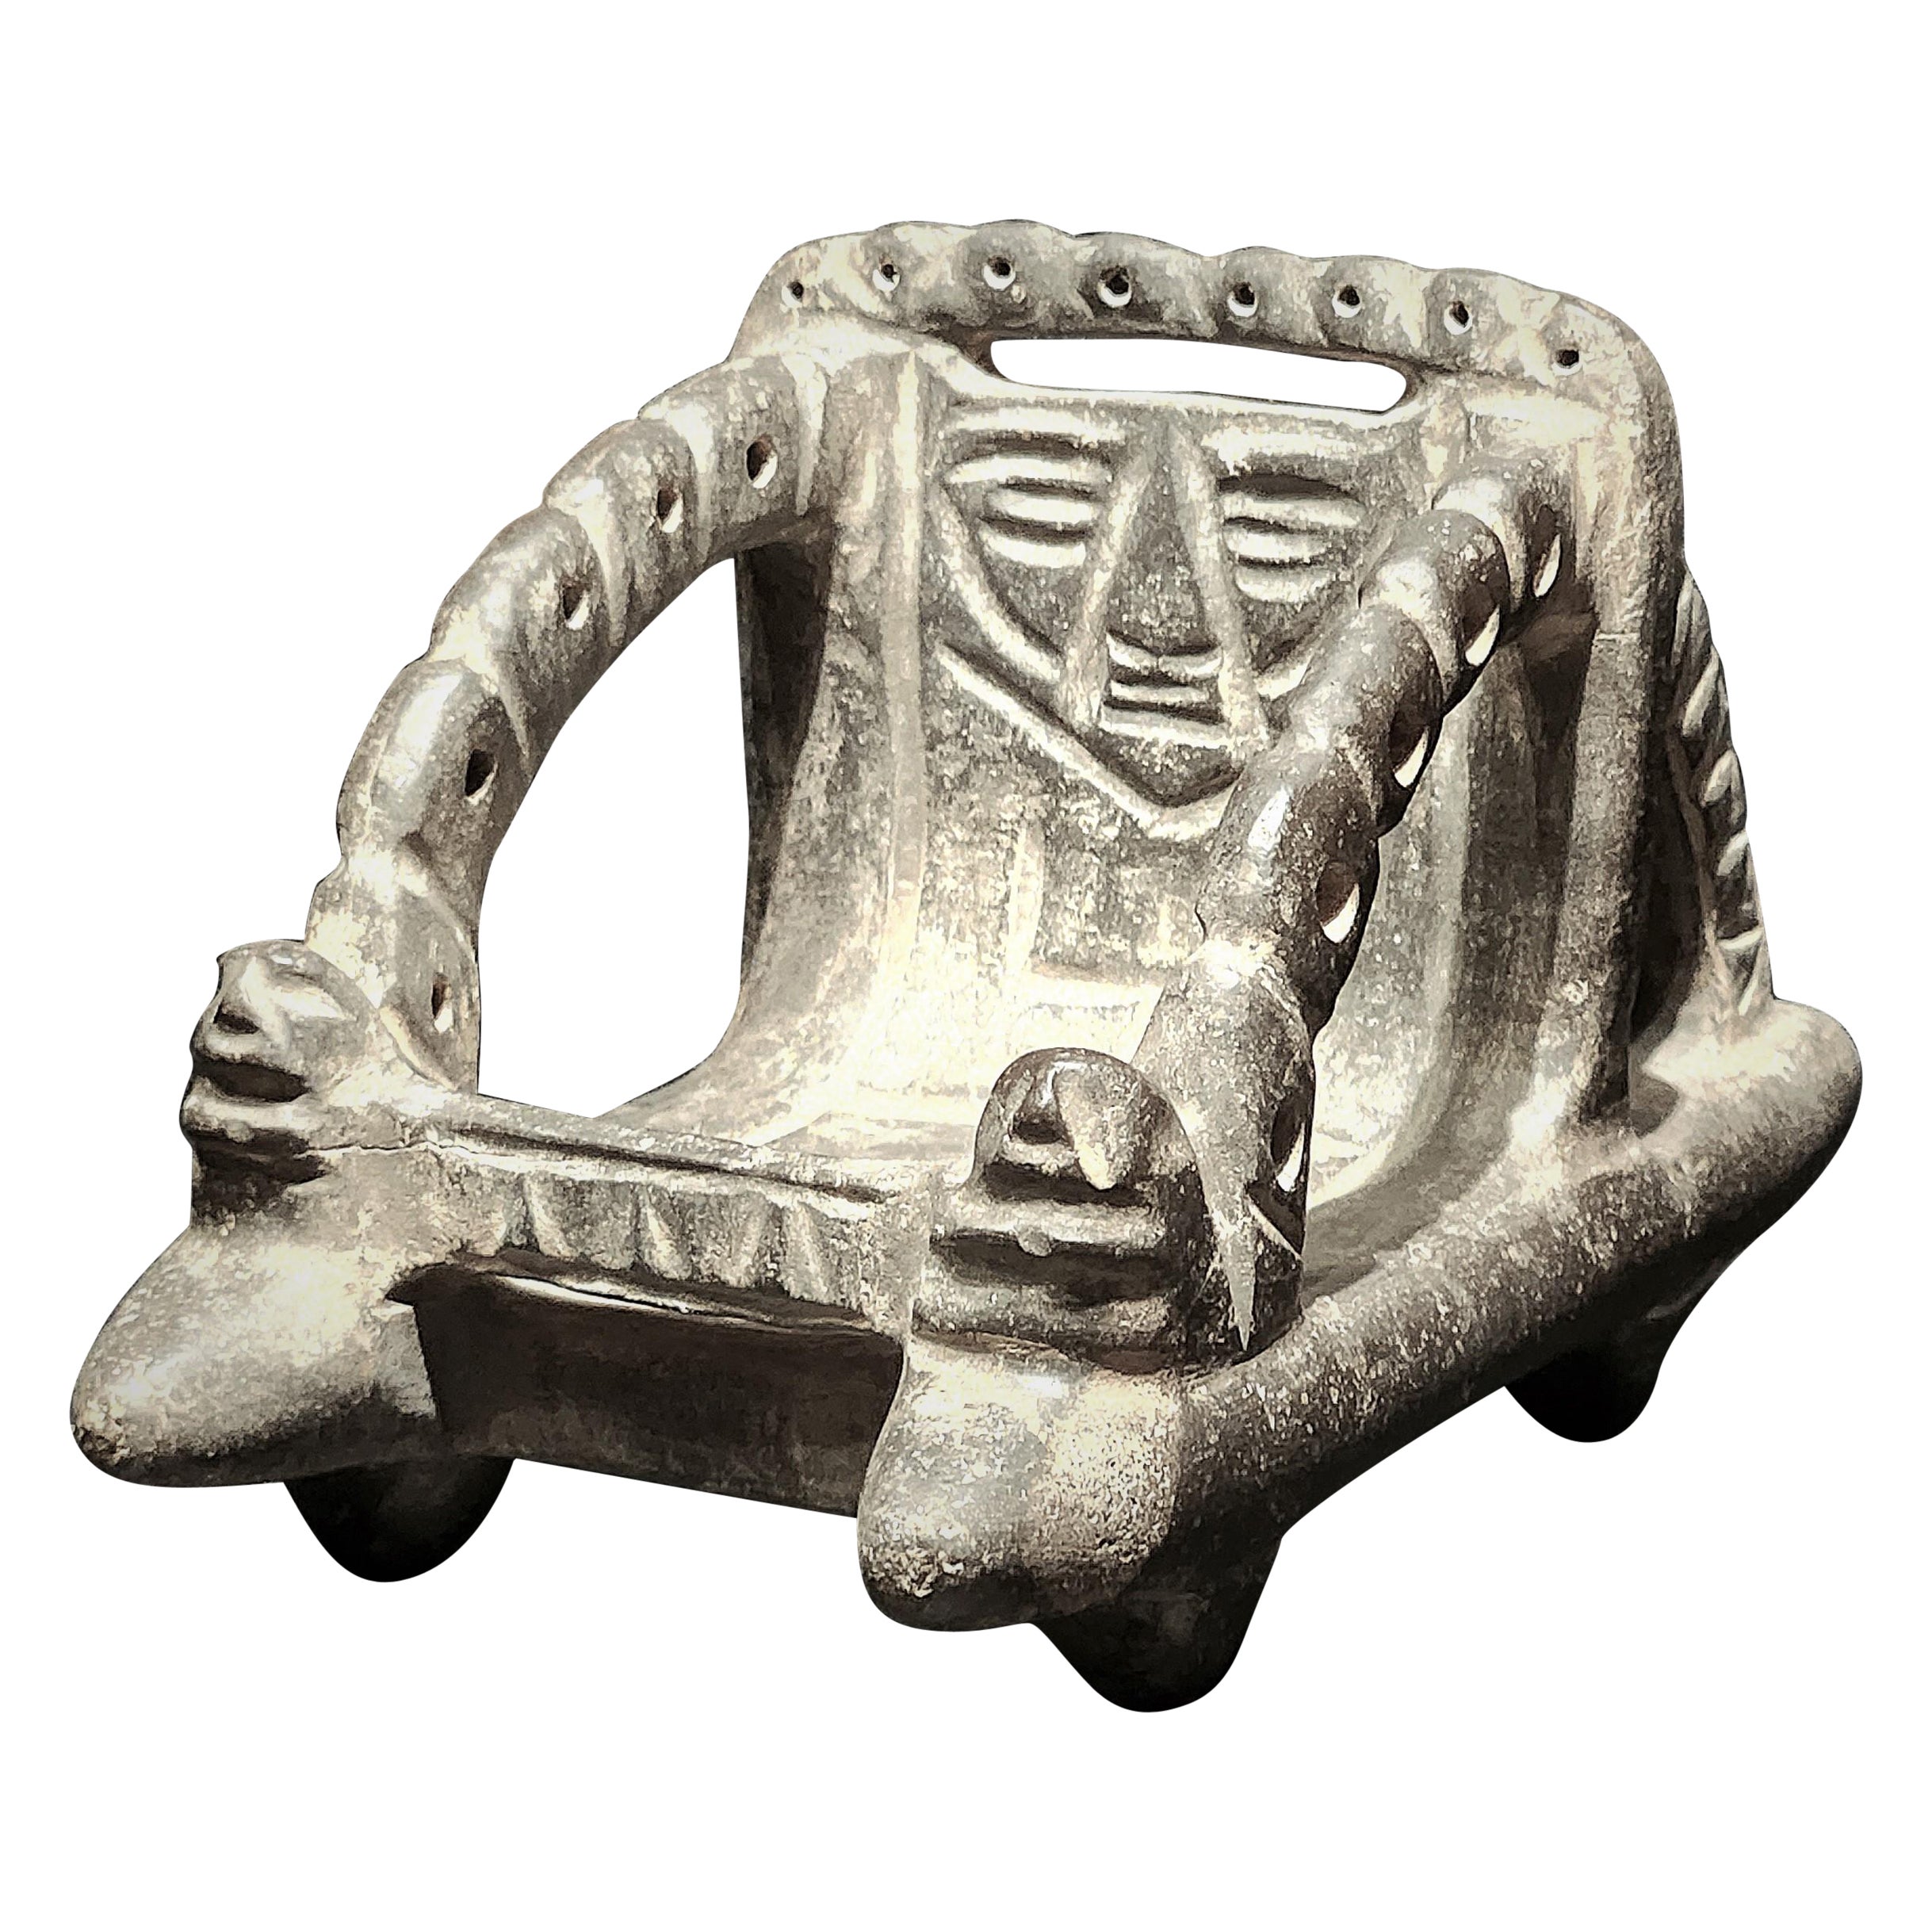 RARE MEZCALA STONE PALANQUIN GROUP

An exceptionally rare Mezcala stone Palanquin Group depicting a four-legged litter with tapering posts, arched arm rests, openwork guilloche designs on three sides, the backrest carved with a schematic, seated